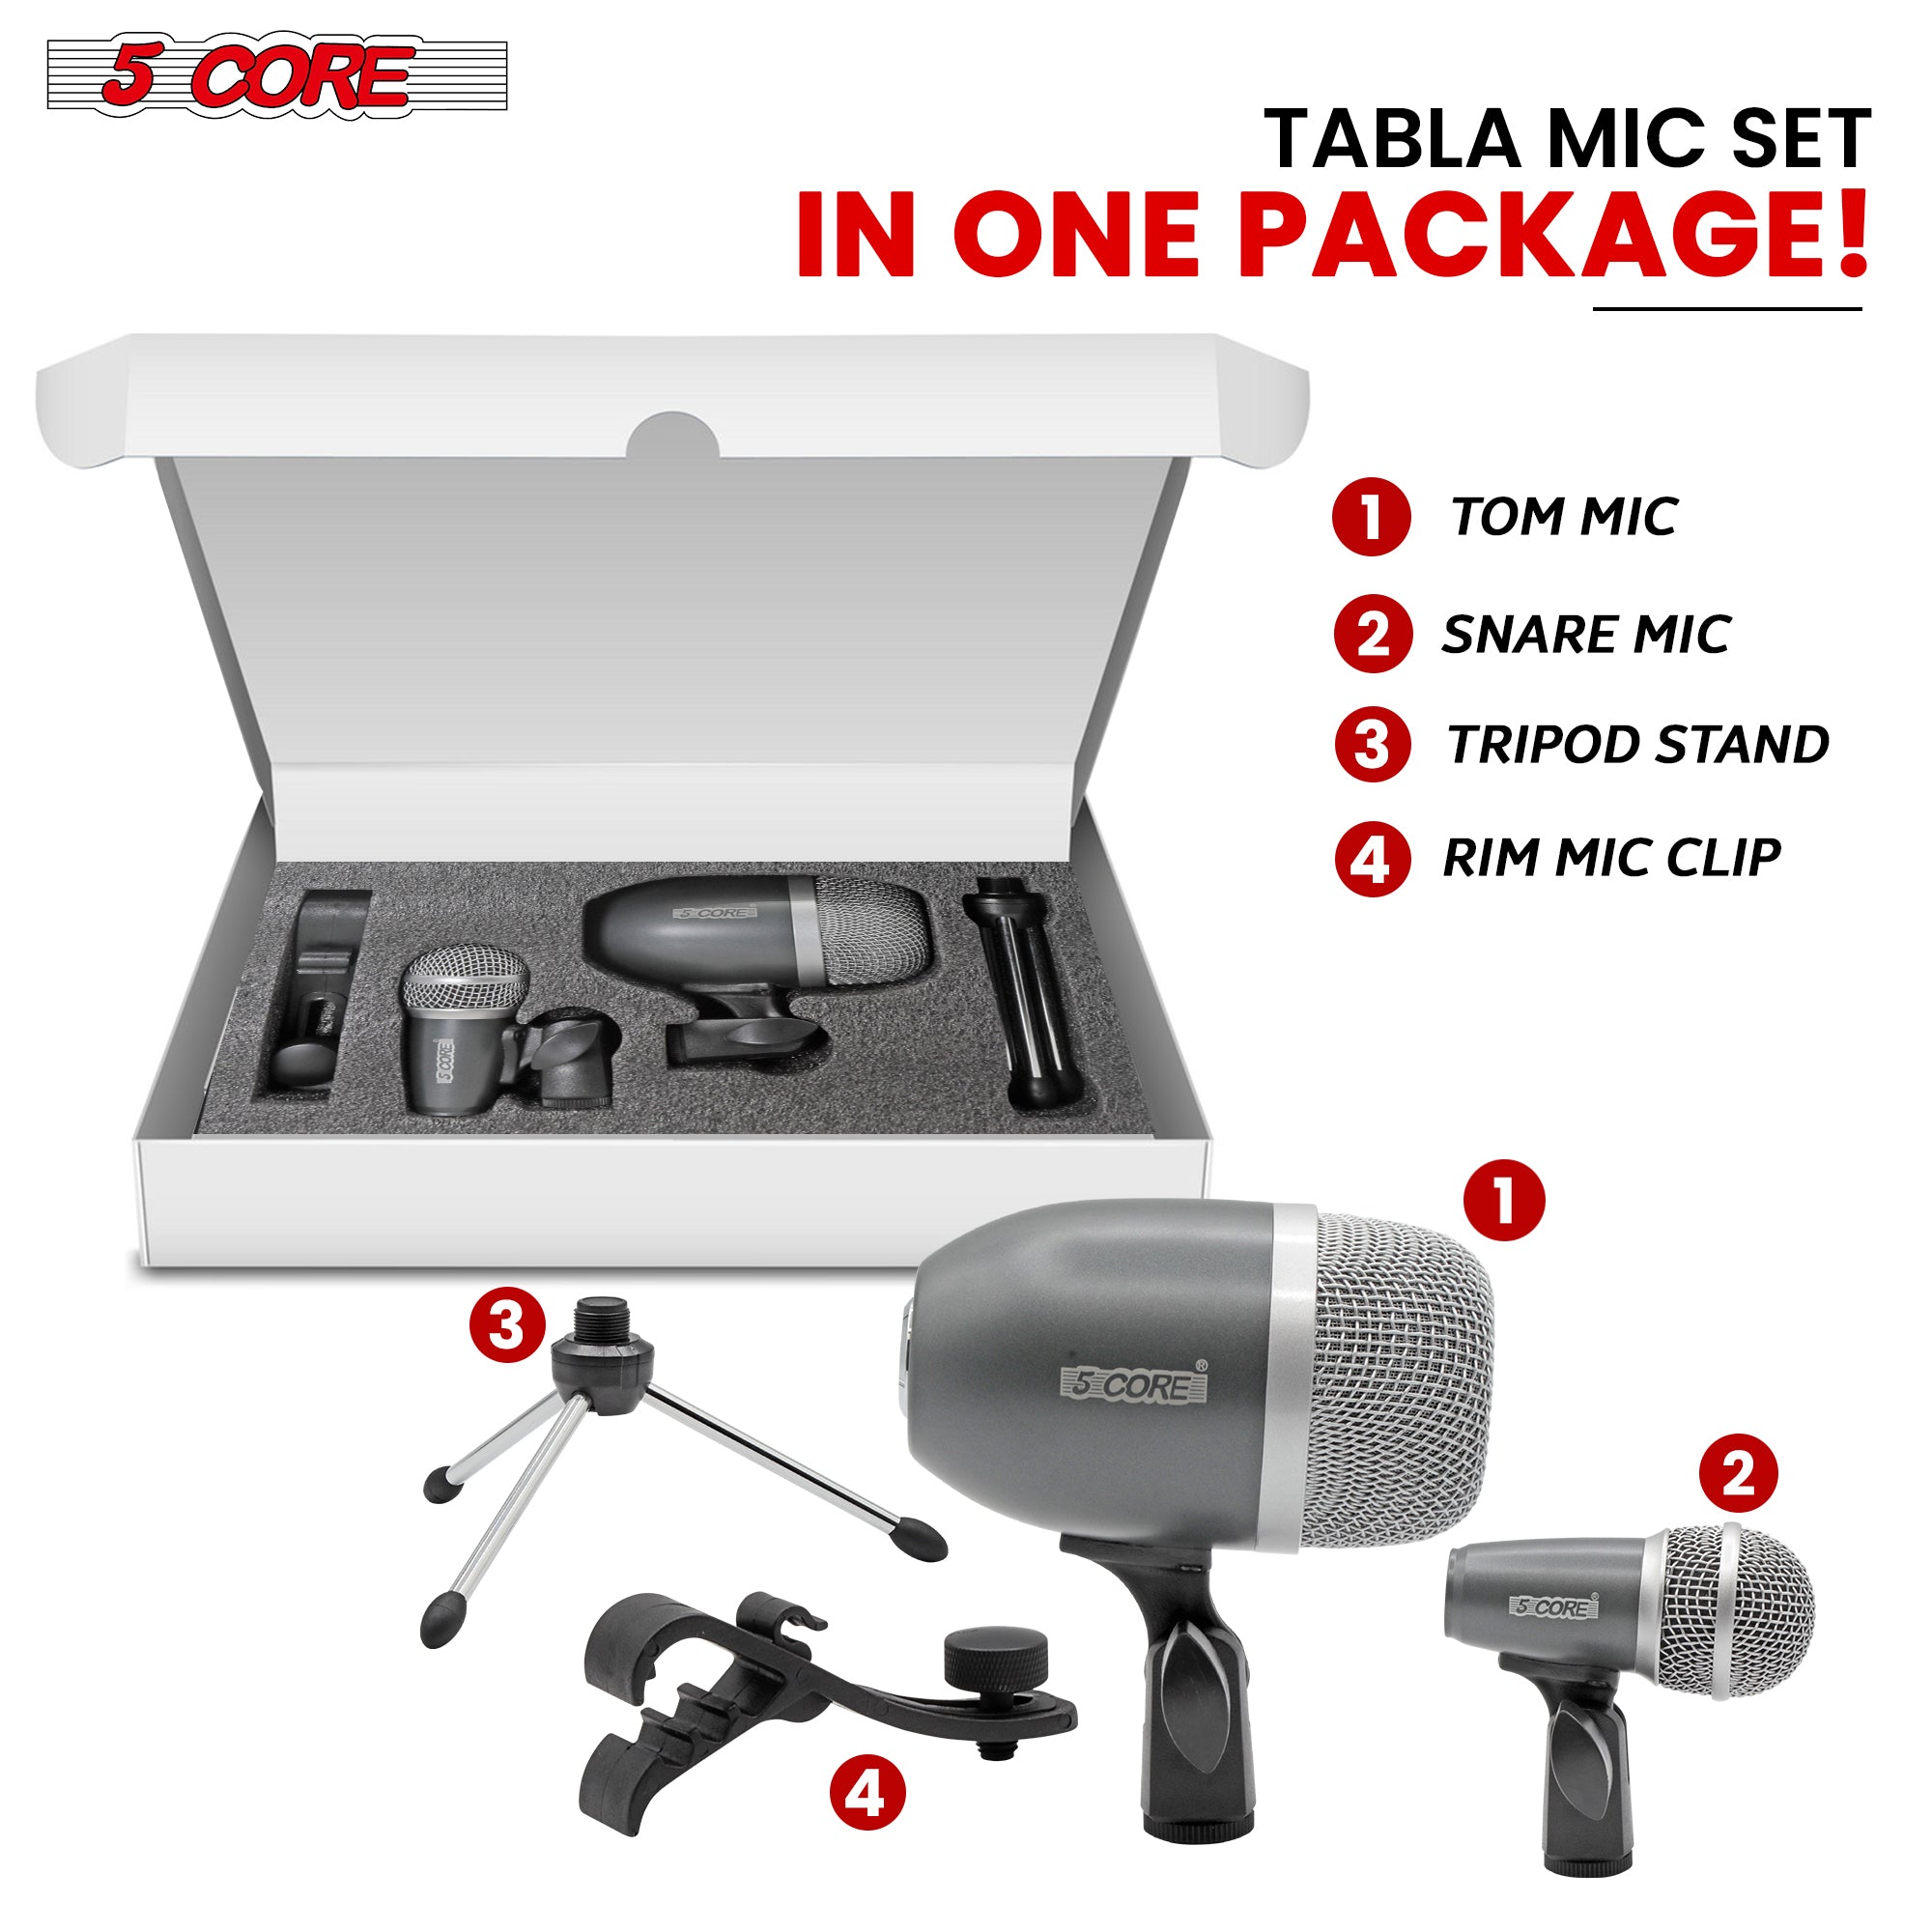 Tabla mic set with tripod stand in one package